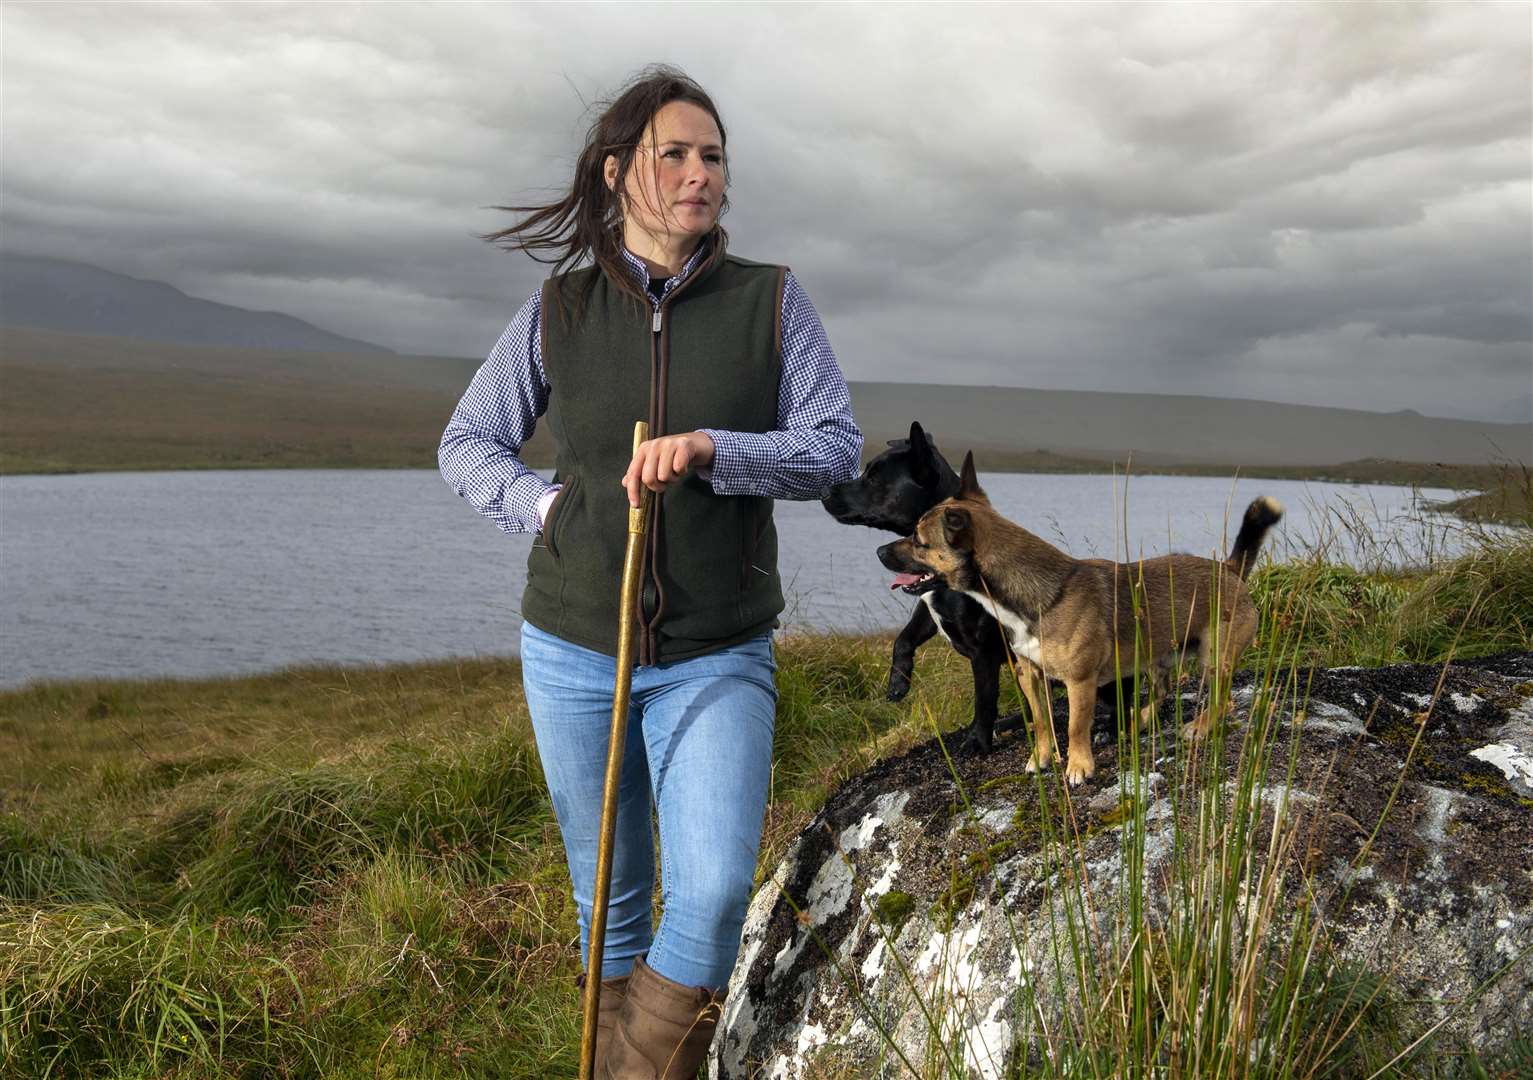 Sophie Clark of Kinlochbervie hopes other women will check out the possibilities of careers in land management.